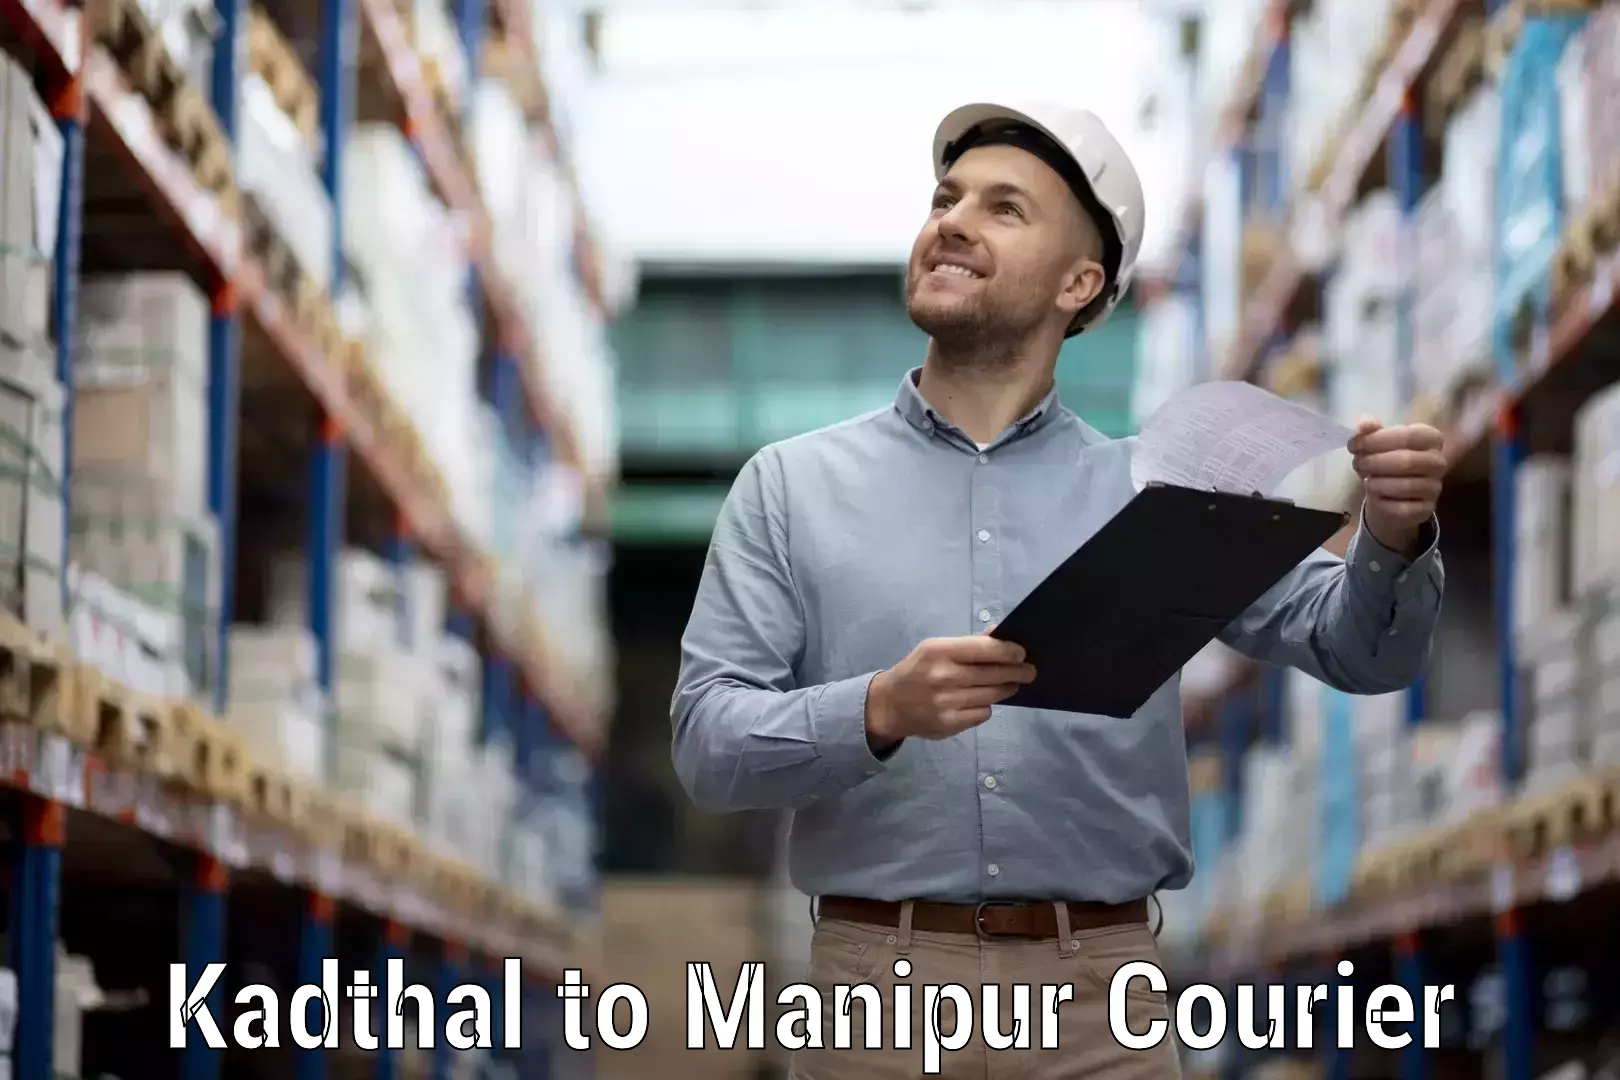 Courier service comparison Kadthal to Manipur